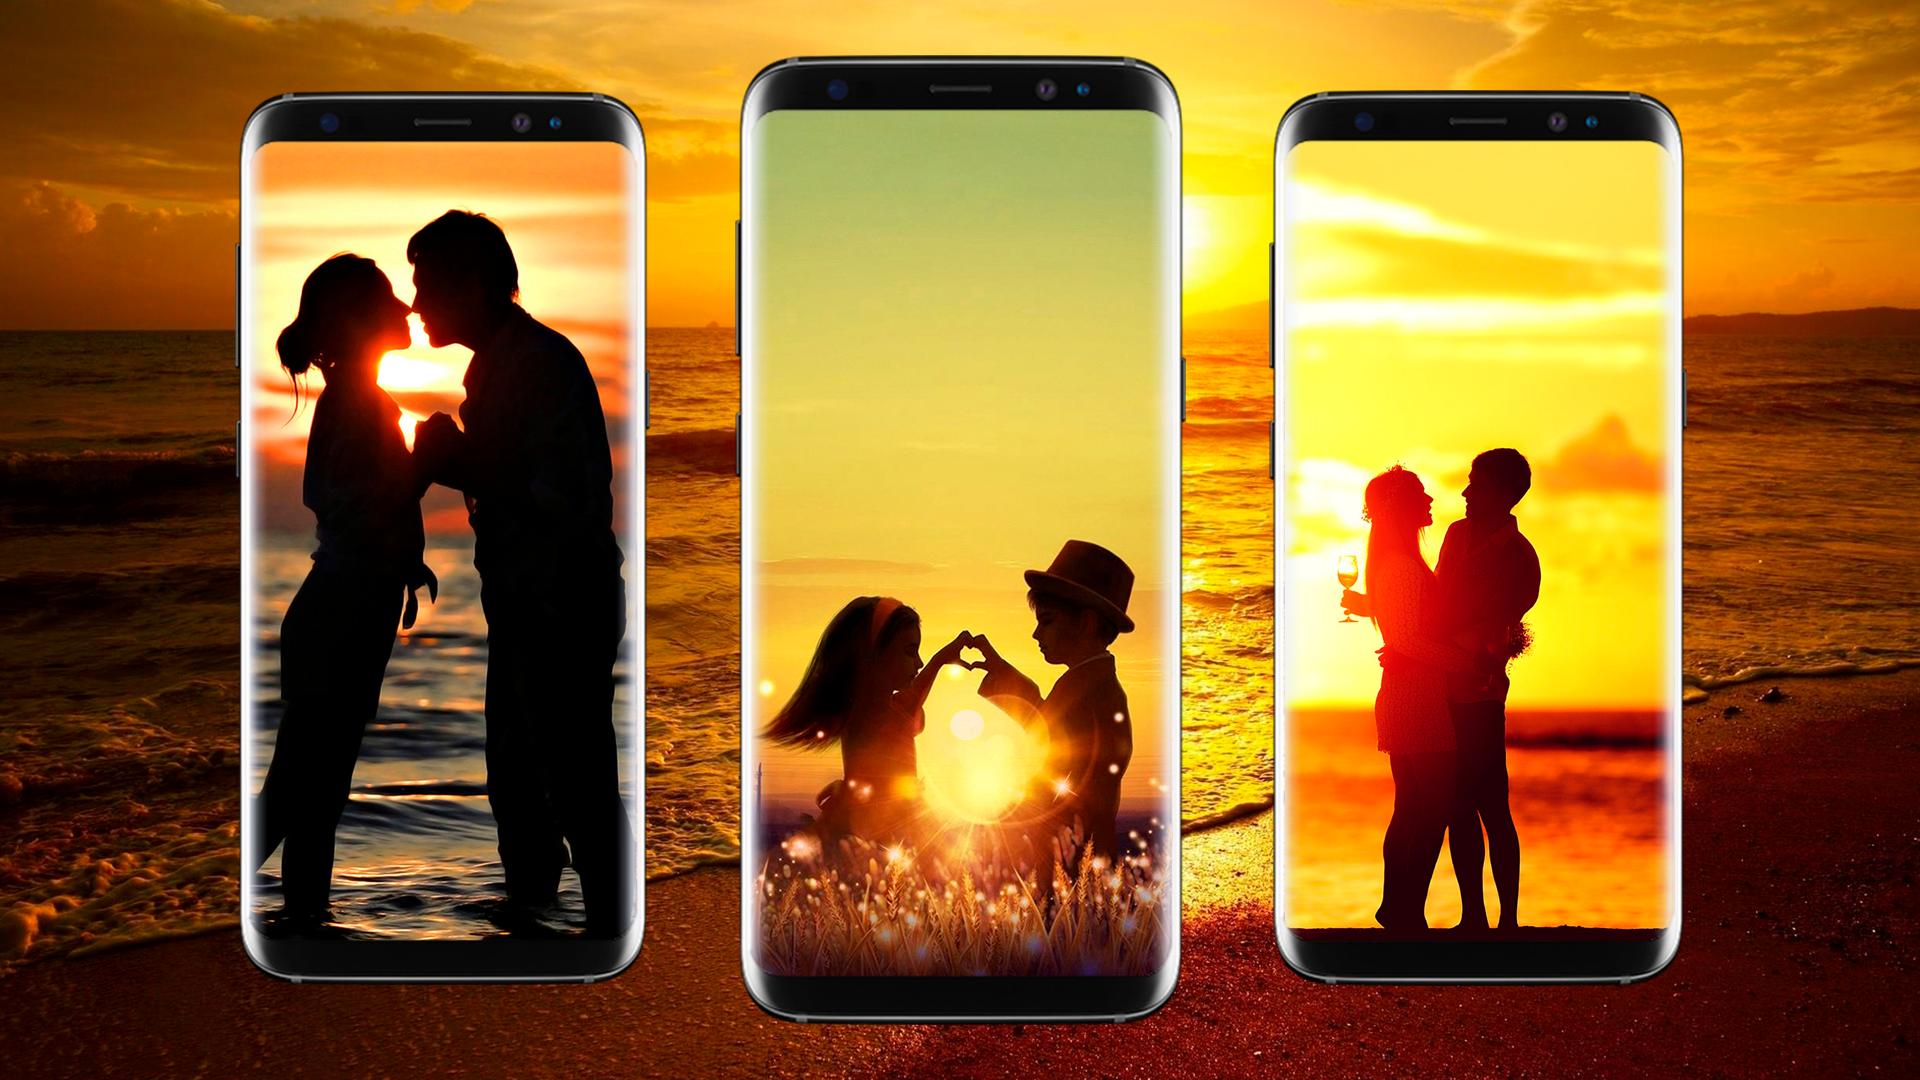 Romantic Couple Wallpapers Hd Love Background For Android Apk Download